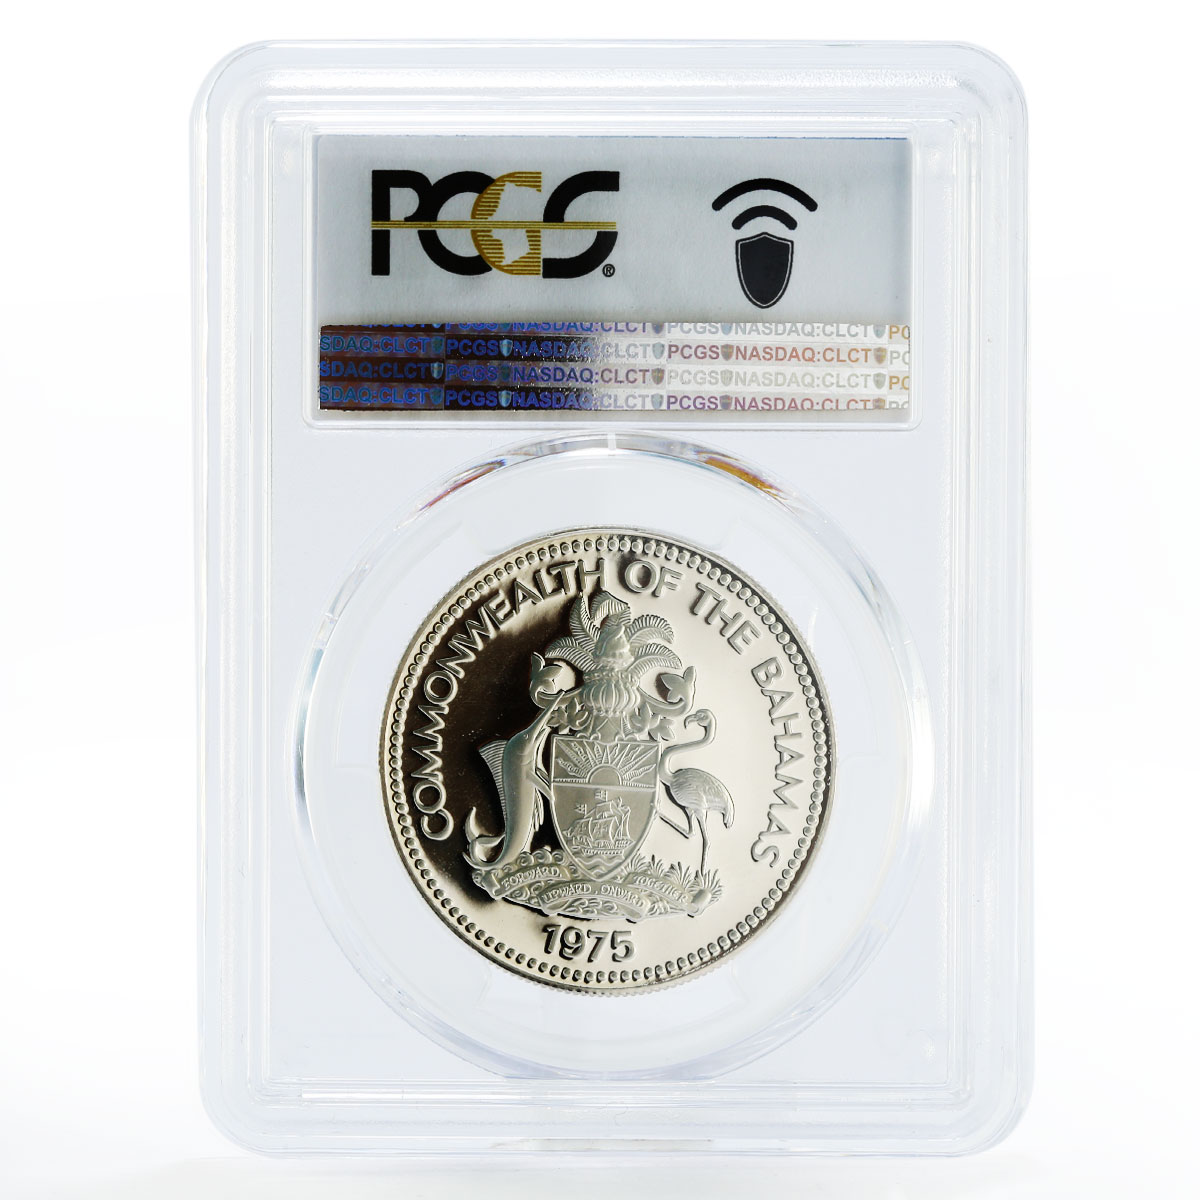 Bahamas 1 dollar The Shell PR70 PCGS proof silver coin 1975